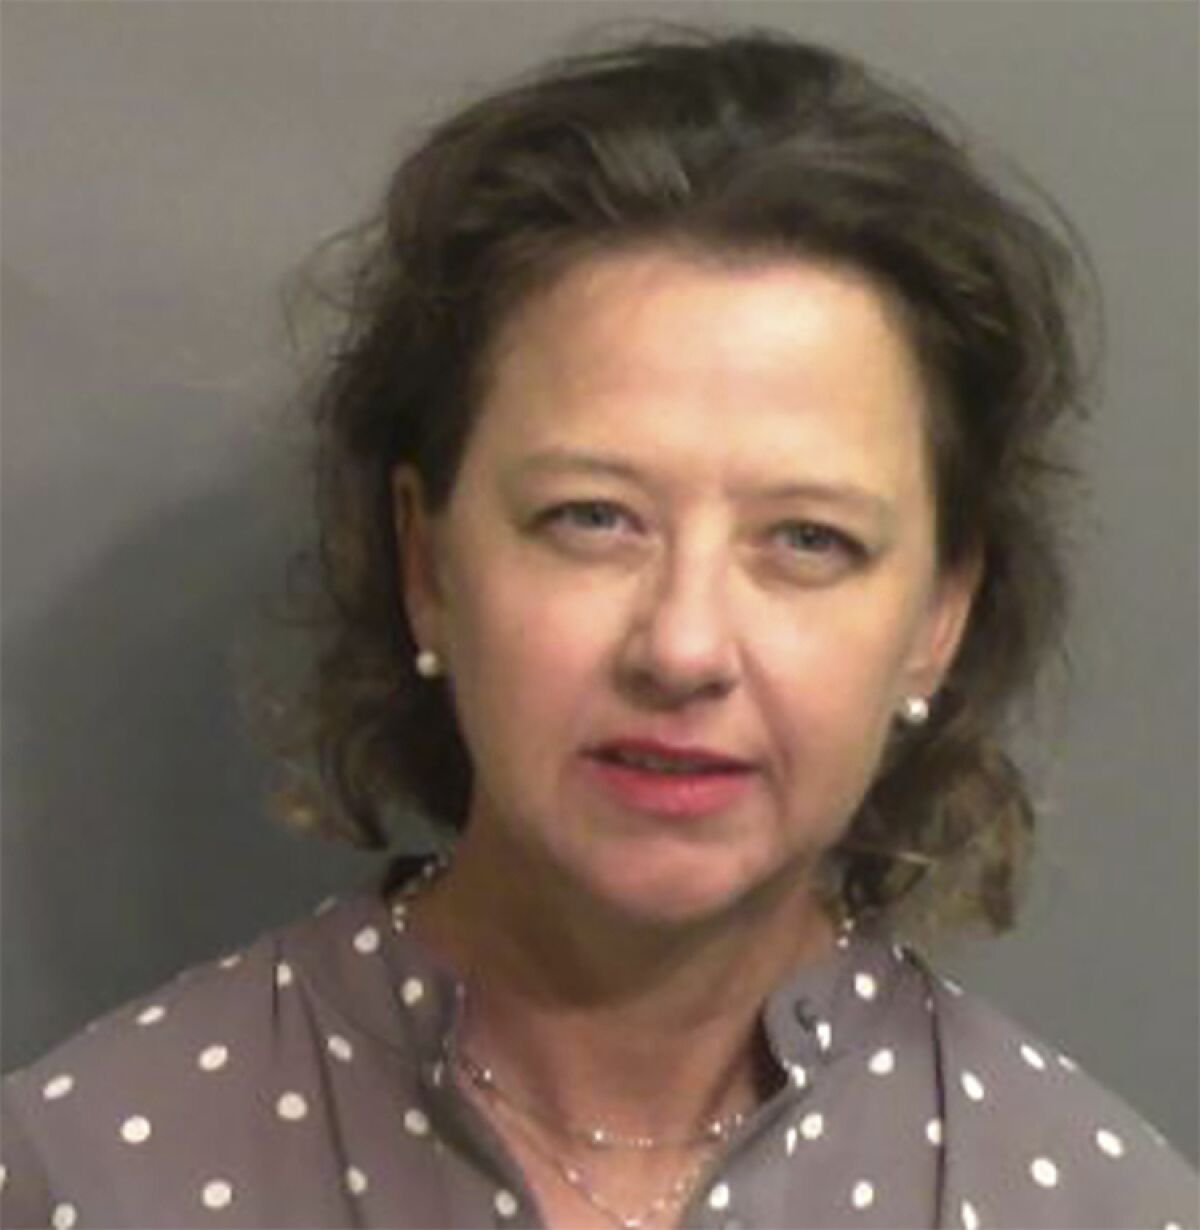 FILE - This jail booking photo provided by Glynn County Sheriff's Office, shows Jackie Johnson, the former district attorney for Georgia's Brunswick Judicial Circuit, after she turned herself in to the Glynn County jail in Brunswick, Ga, on Wednesday, Sept. 8, 2021. One of the men convicted of murder in the street chase and fatal shooting of Ahmaud Arbery spoke with Johnson, his former boss, the local district attorney, several times by phone in the days and weeks following the 2020 killing, according to a court document filed Thursday, May 4, 2022.(Glynn County Sheriff's Office via AP, File)